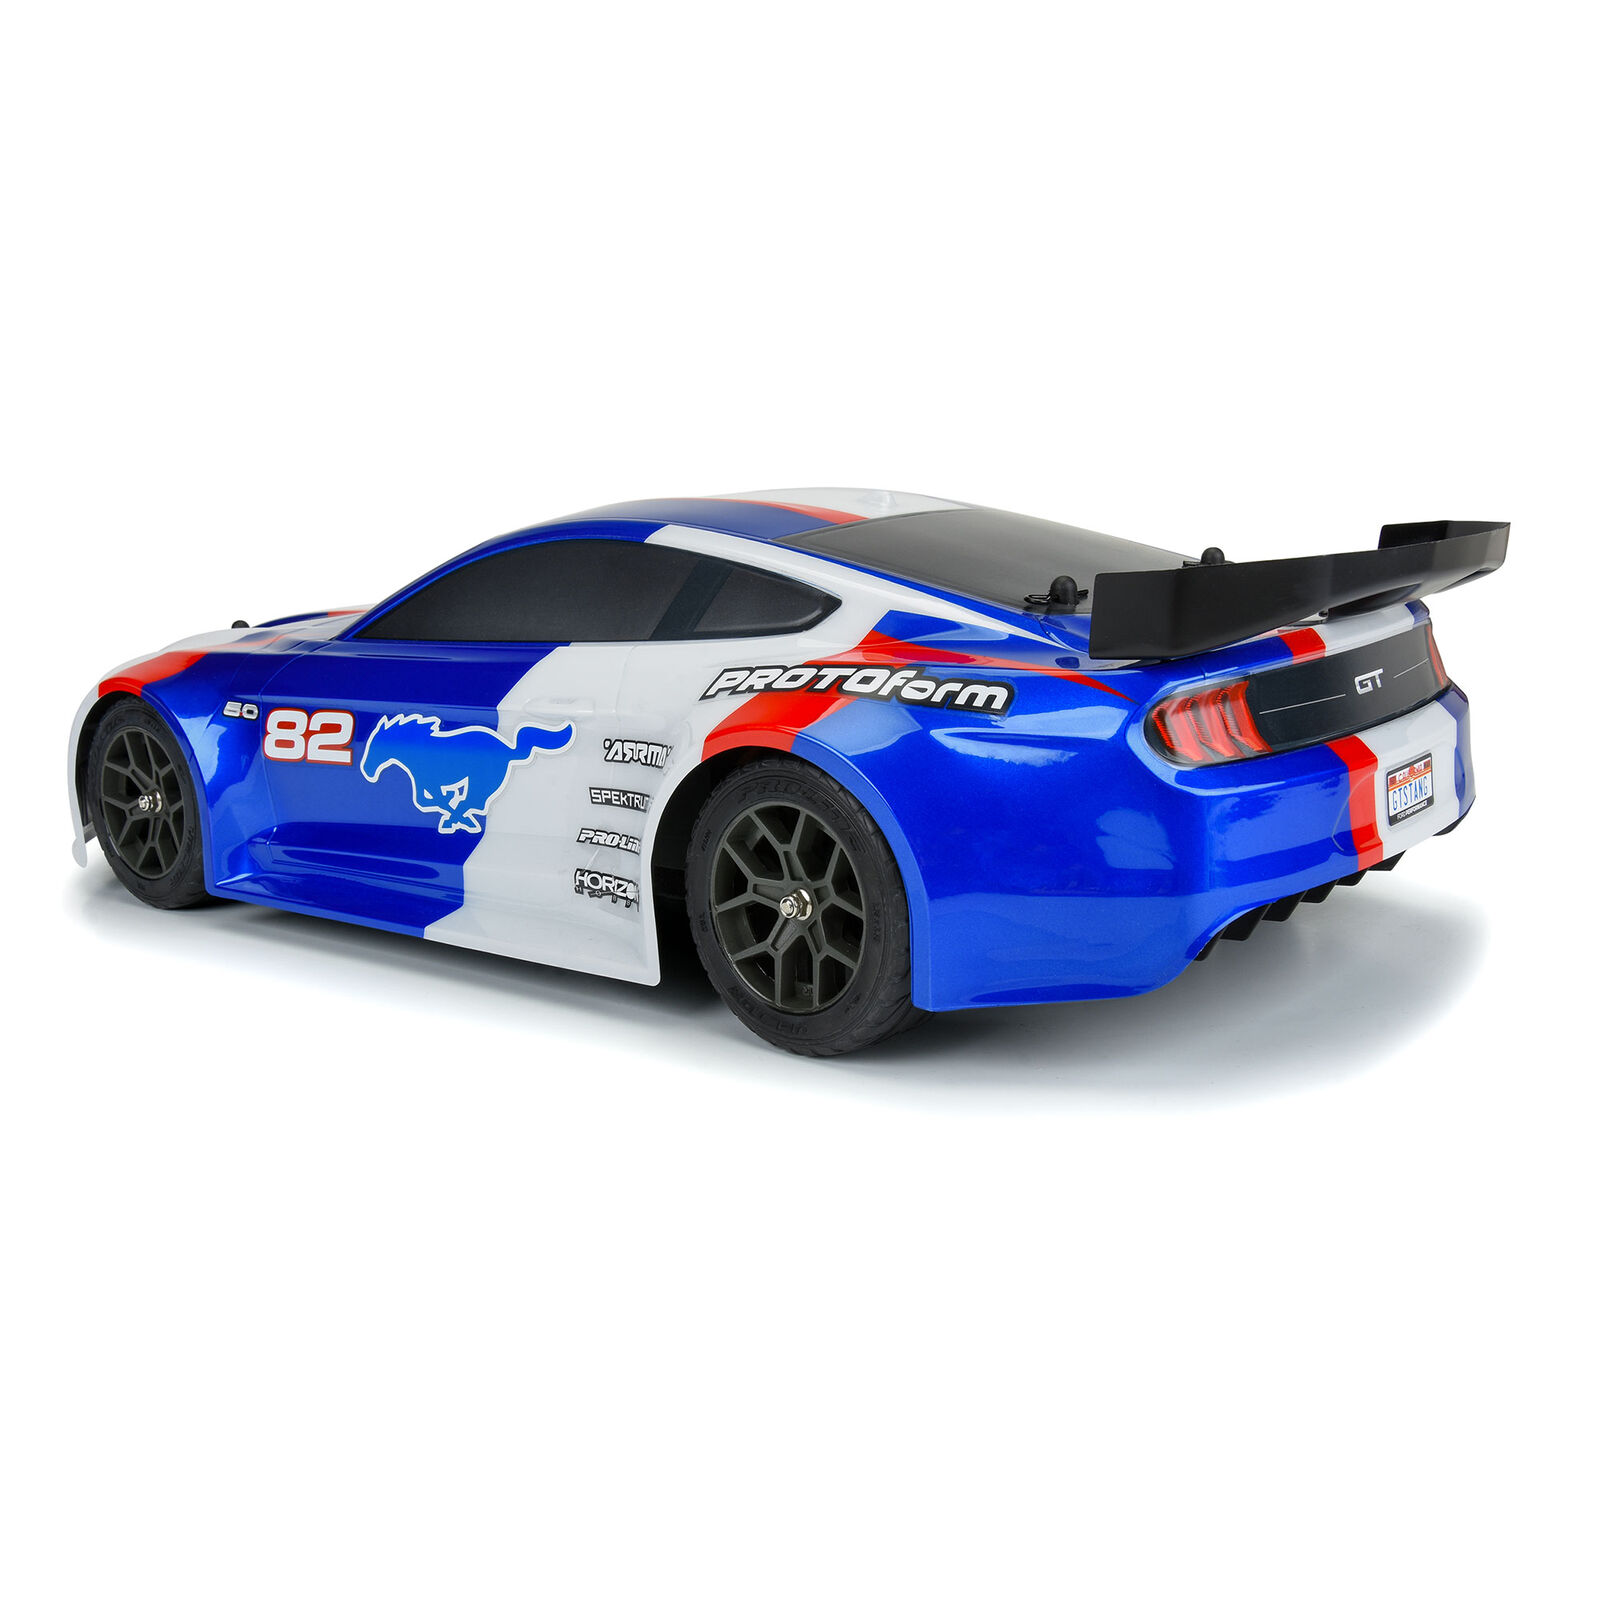 Infraction | - Pro-Line & 2021 PROTOform Racing 1/8 Pro-line Body Vendetta 3S Painted Ford Mustang (Blue):